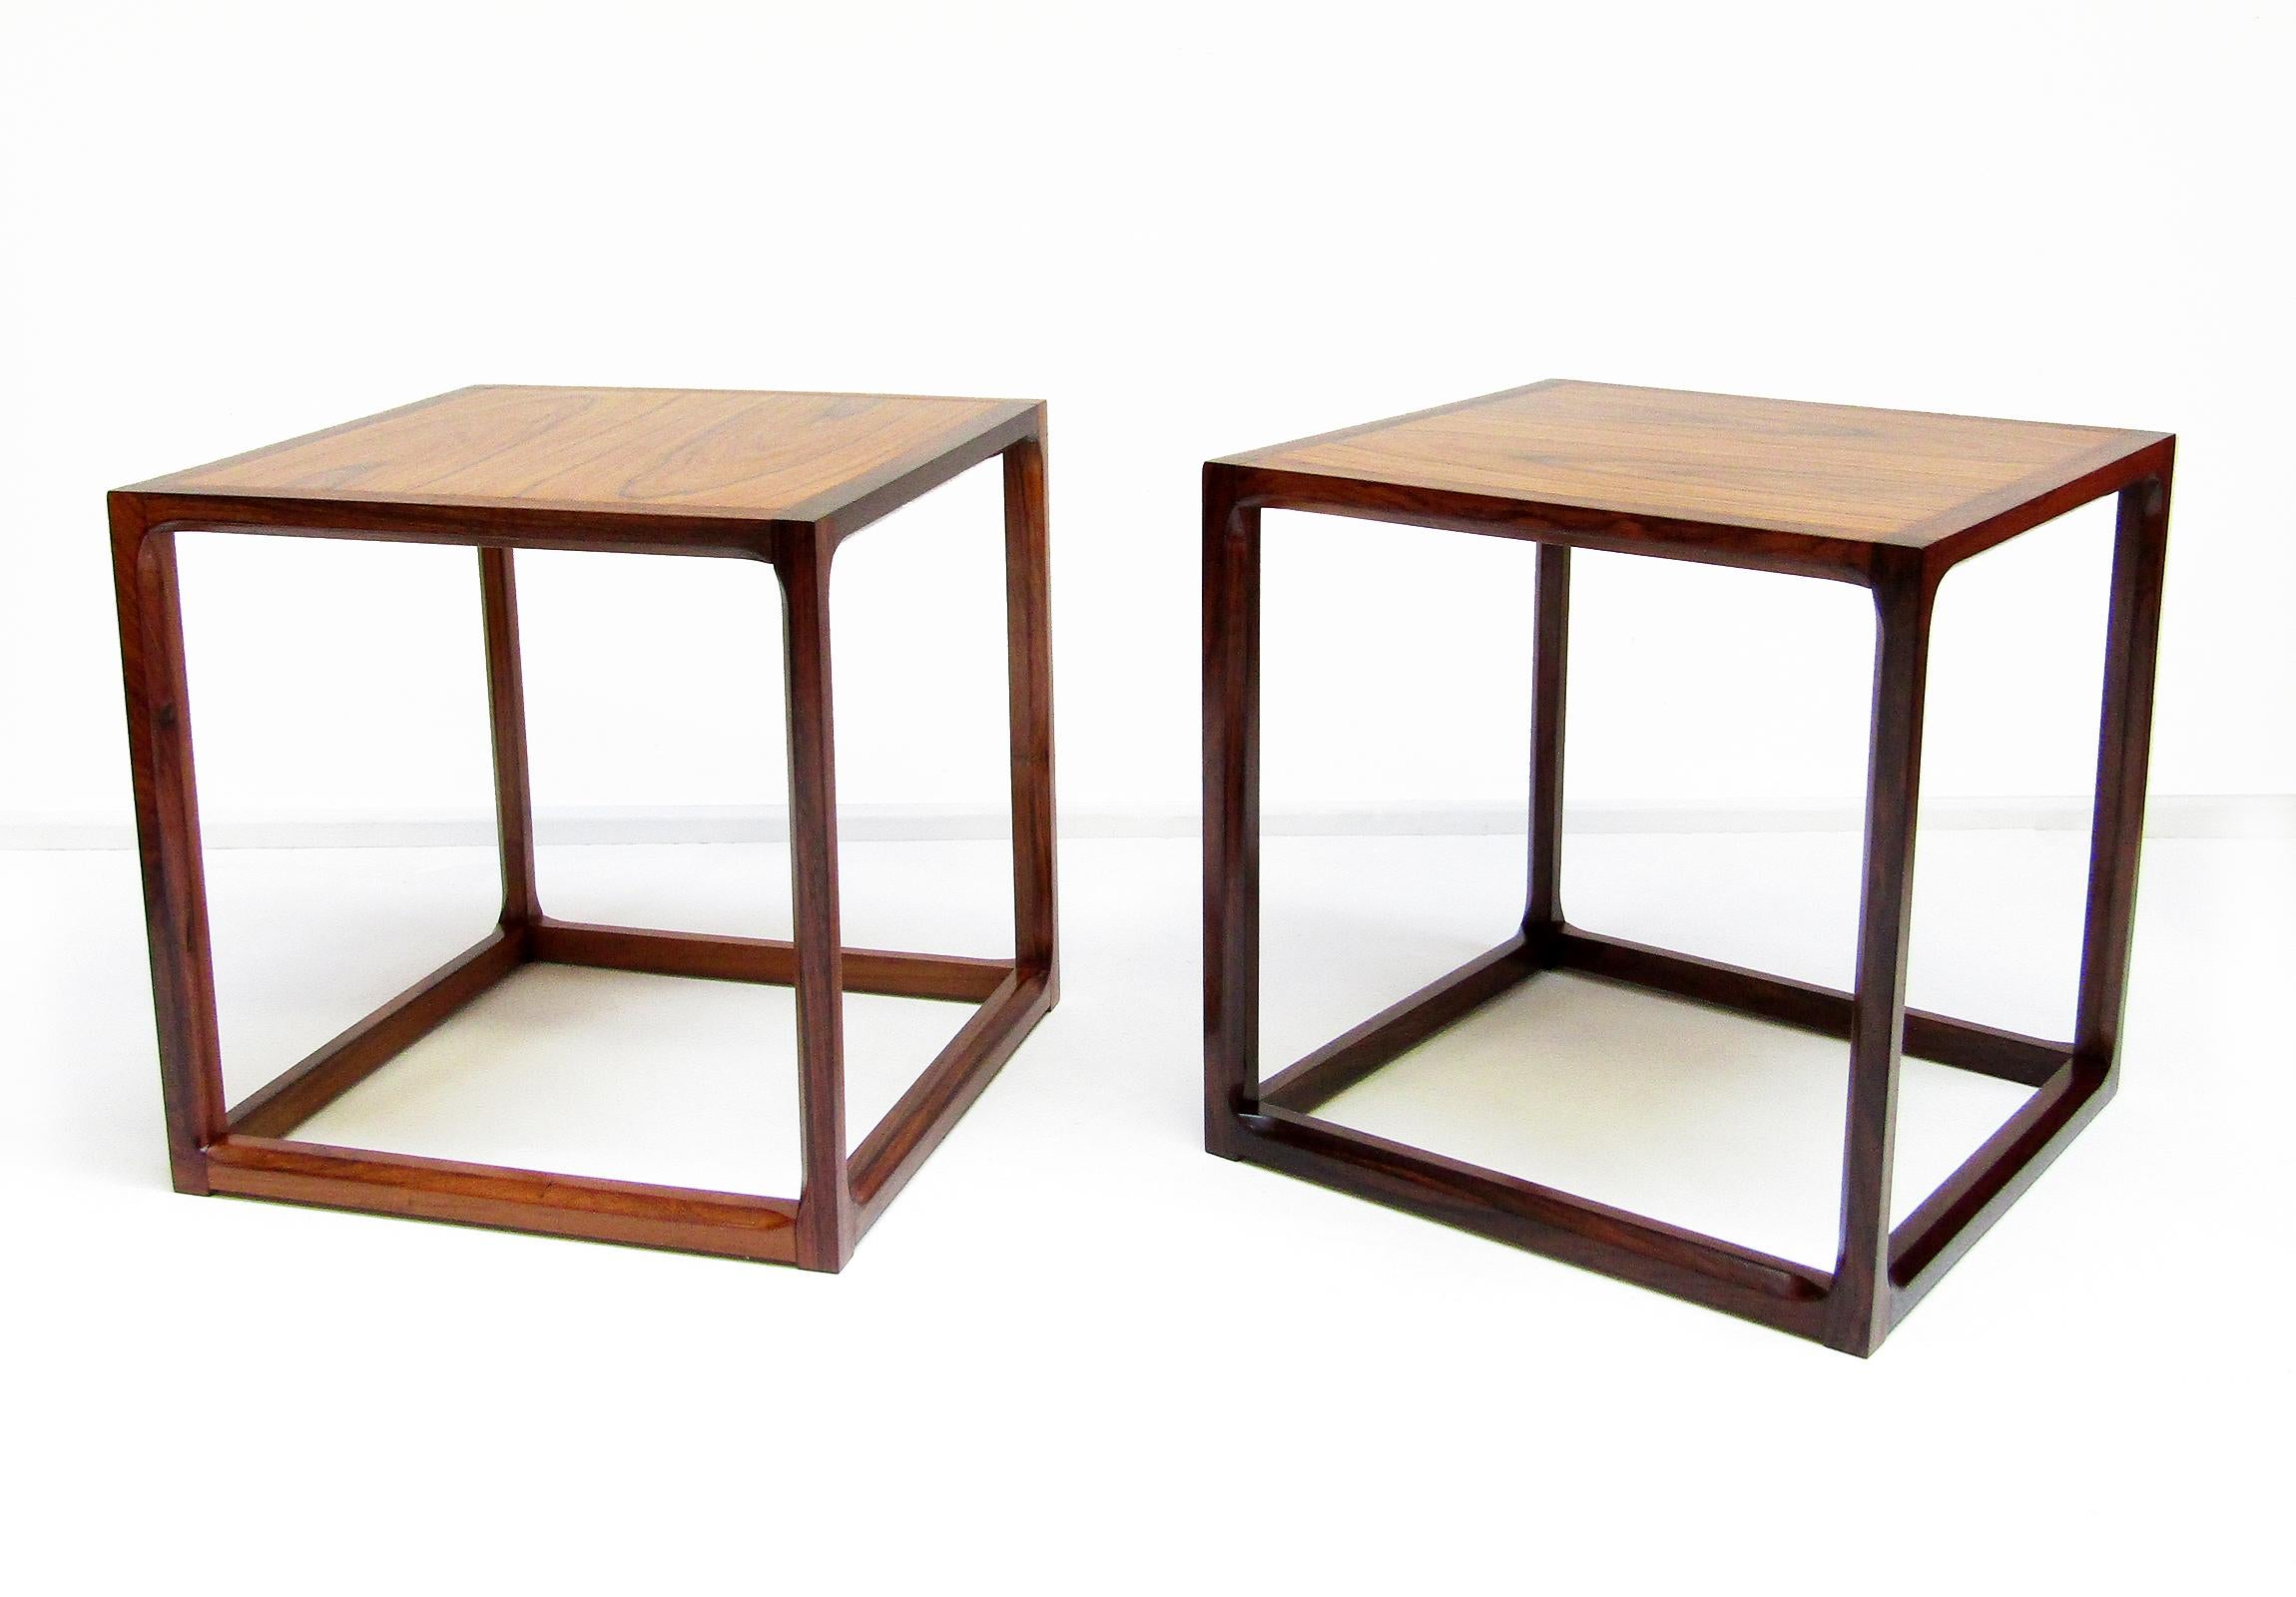 Pair of Danish Rosewood 1960s Cube Lamp Tables / Nightstands by Kai Kristiansen For Sale 3